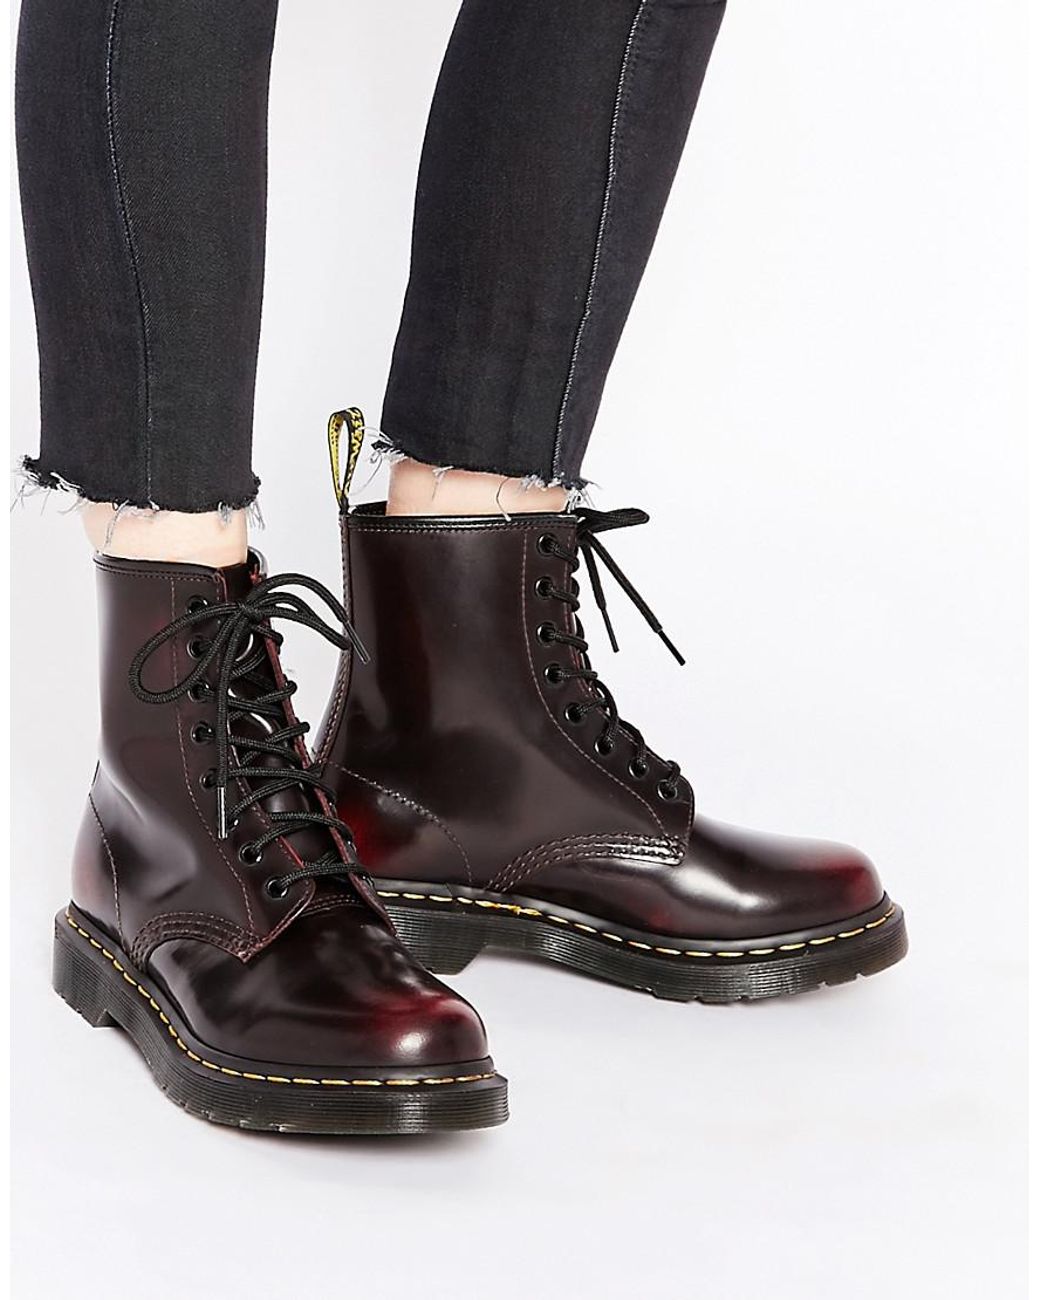 Dr. Martens 1460 Cherry Arcadia 8-eye Boots in Red | Lyst